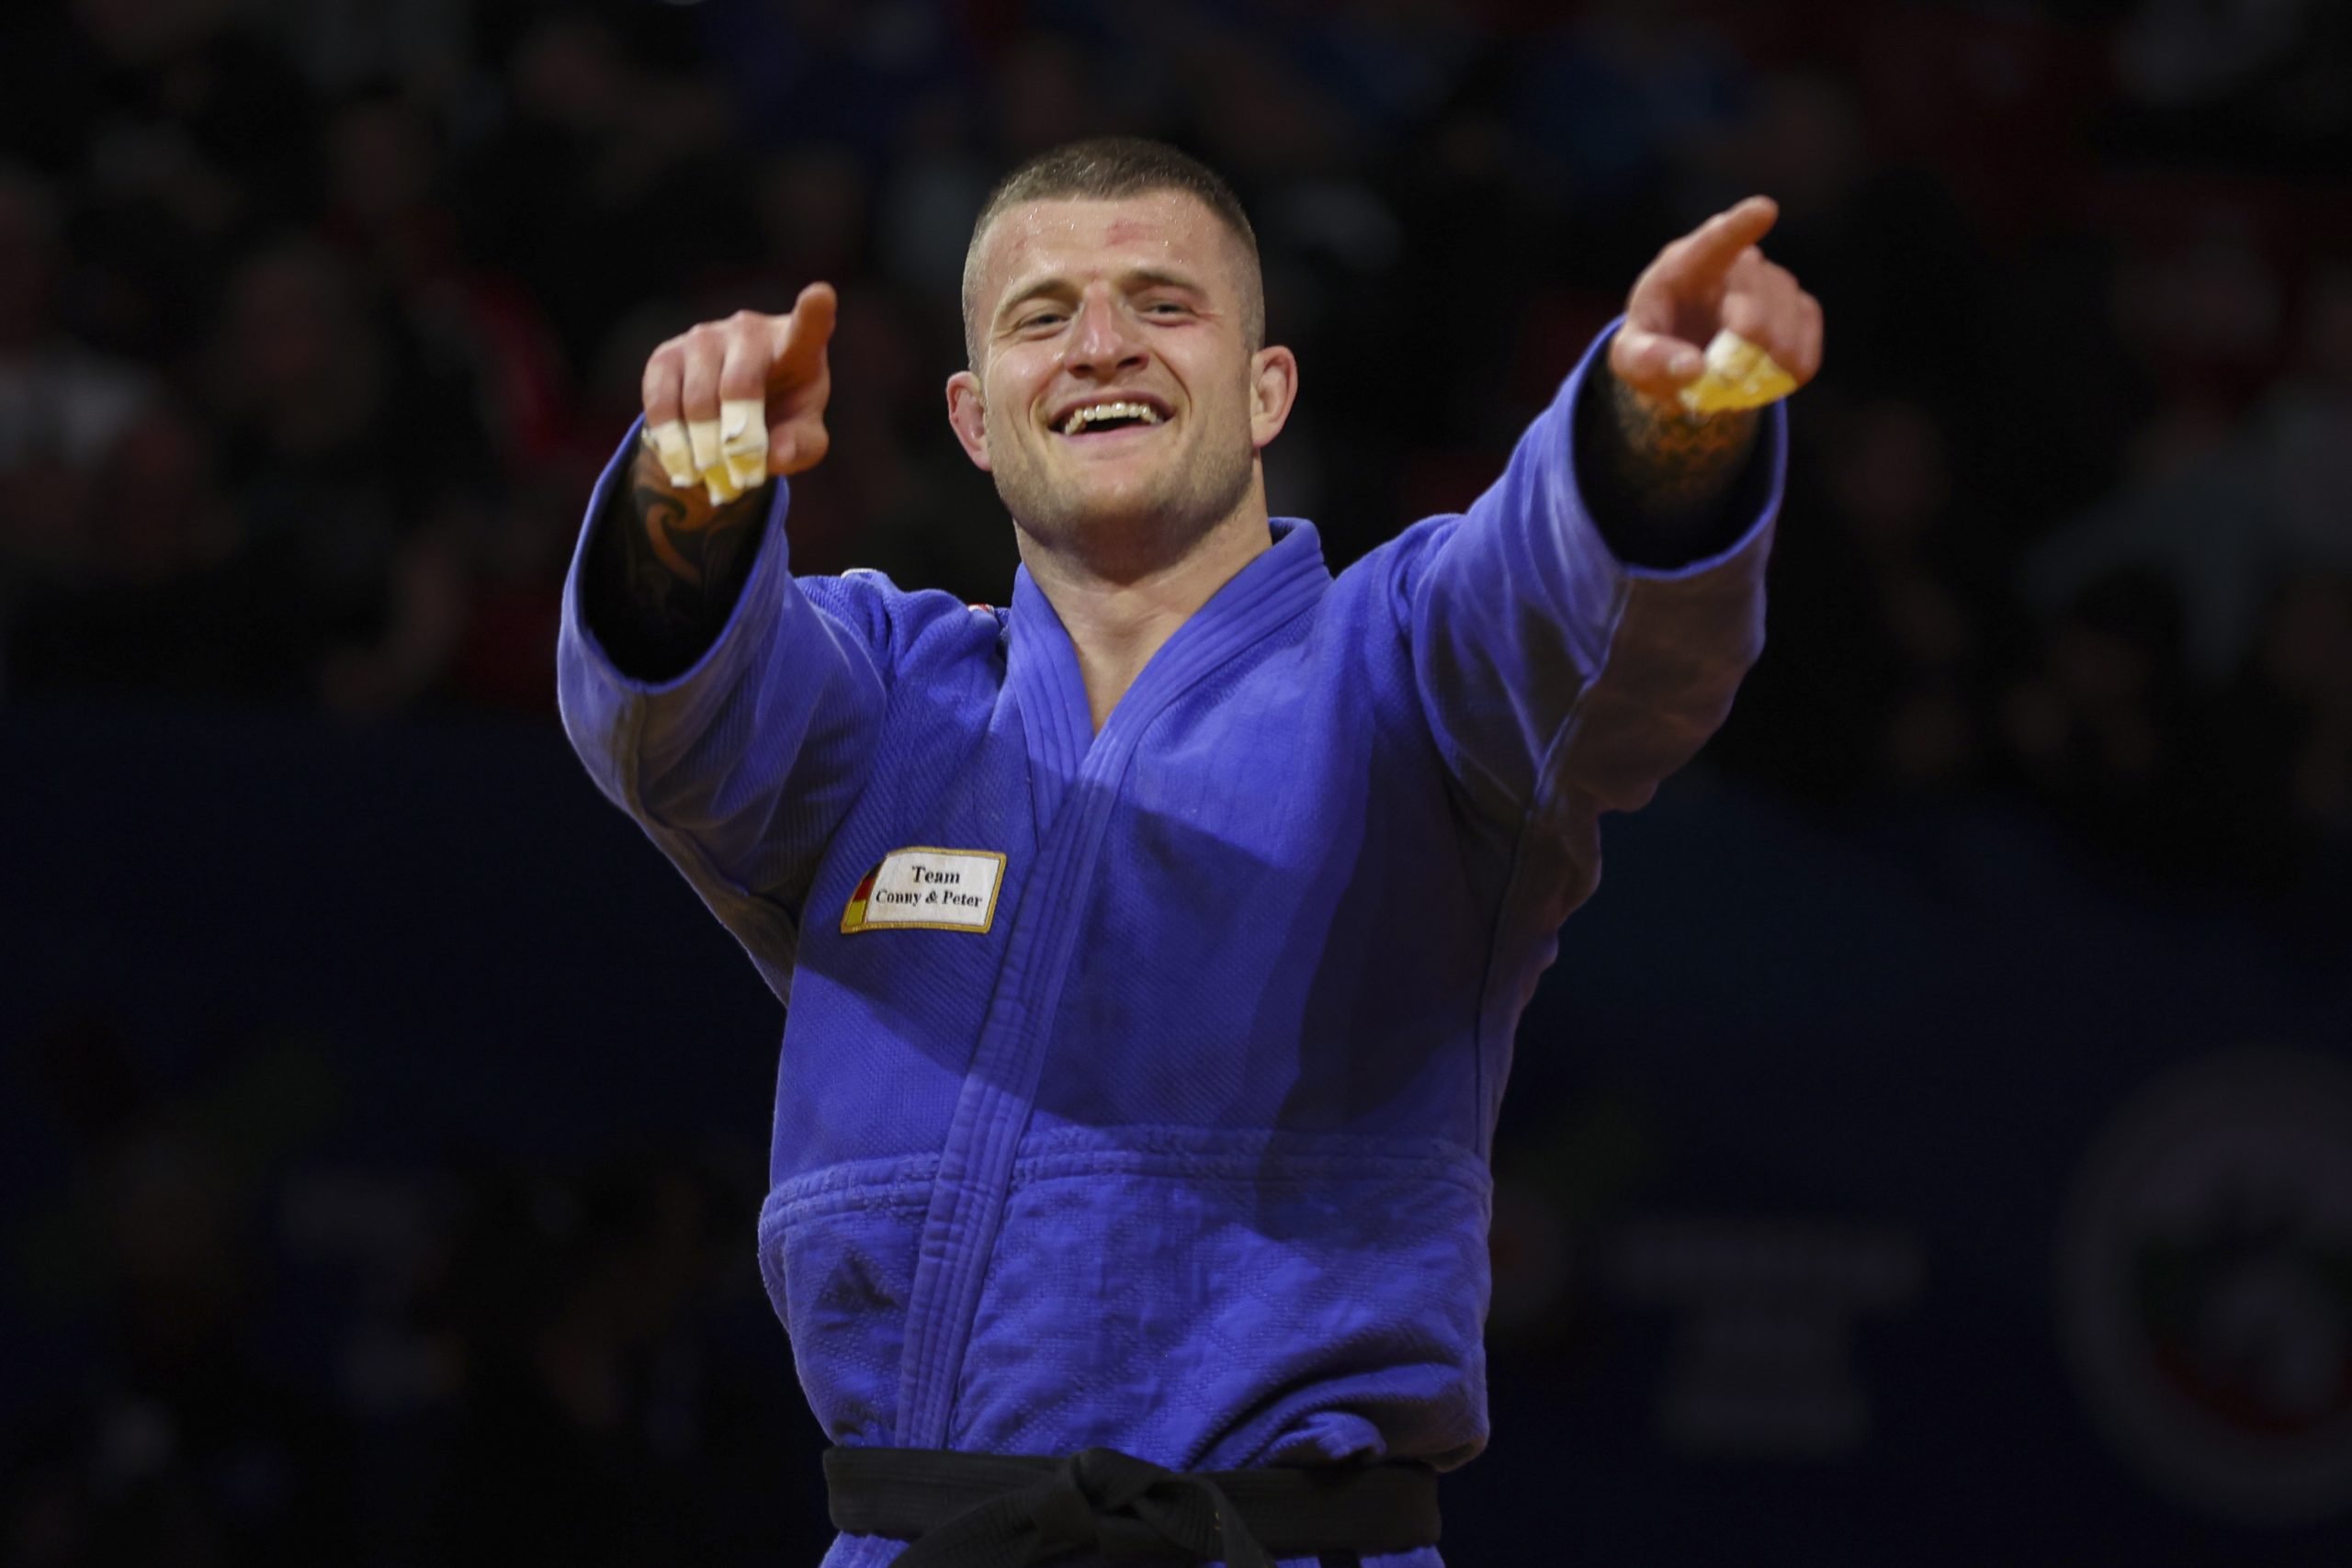 EUROPEAN CHAMPIONSHIPS CONCLUDES WITH STUNNING SURPRISES